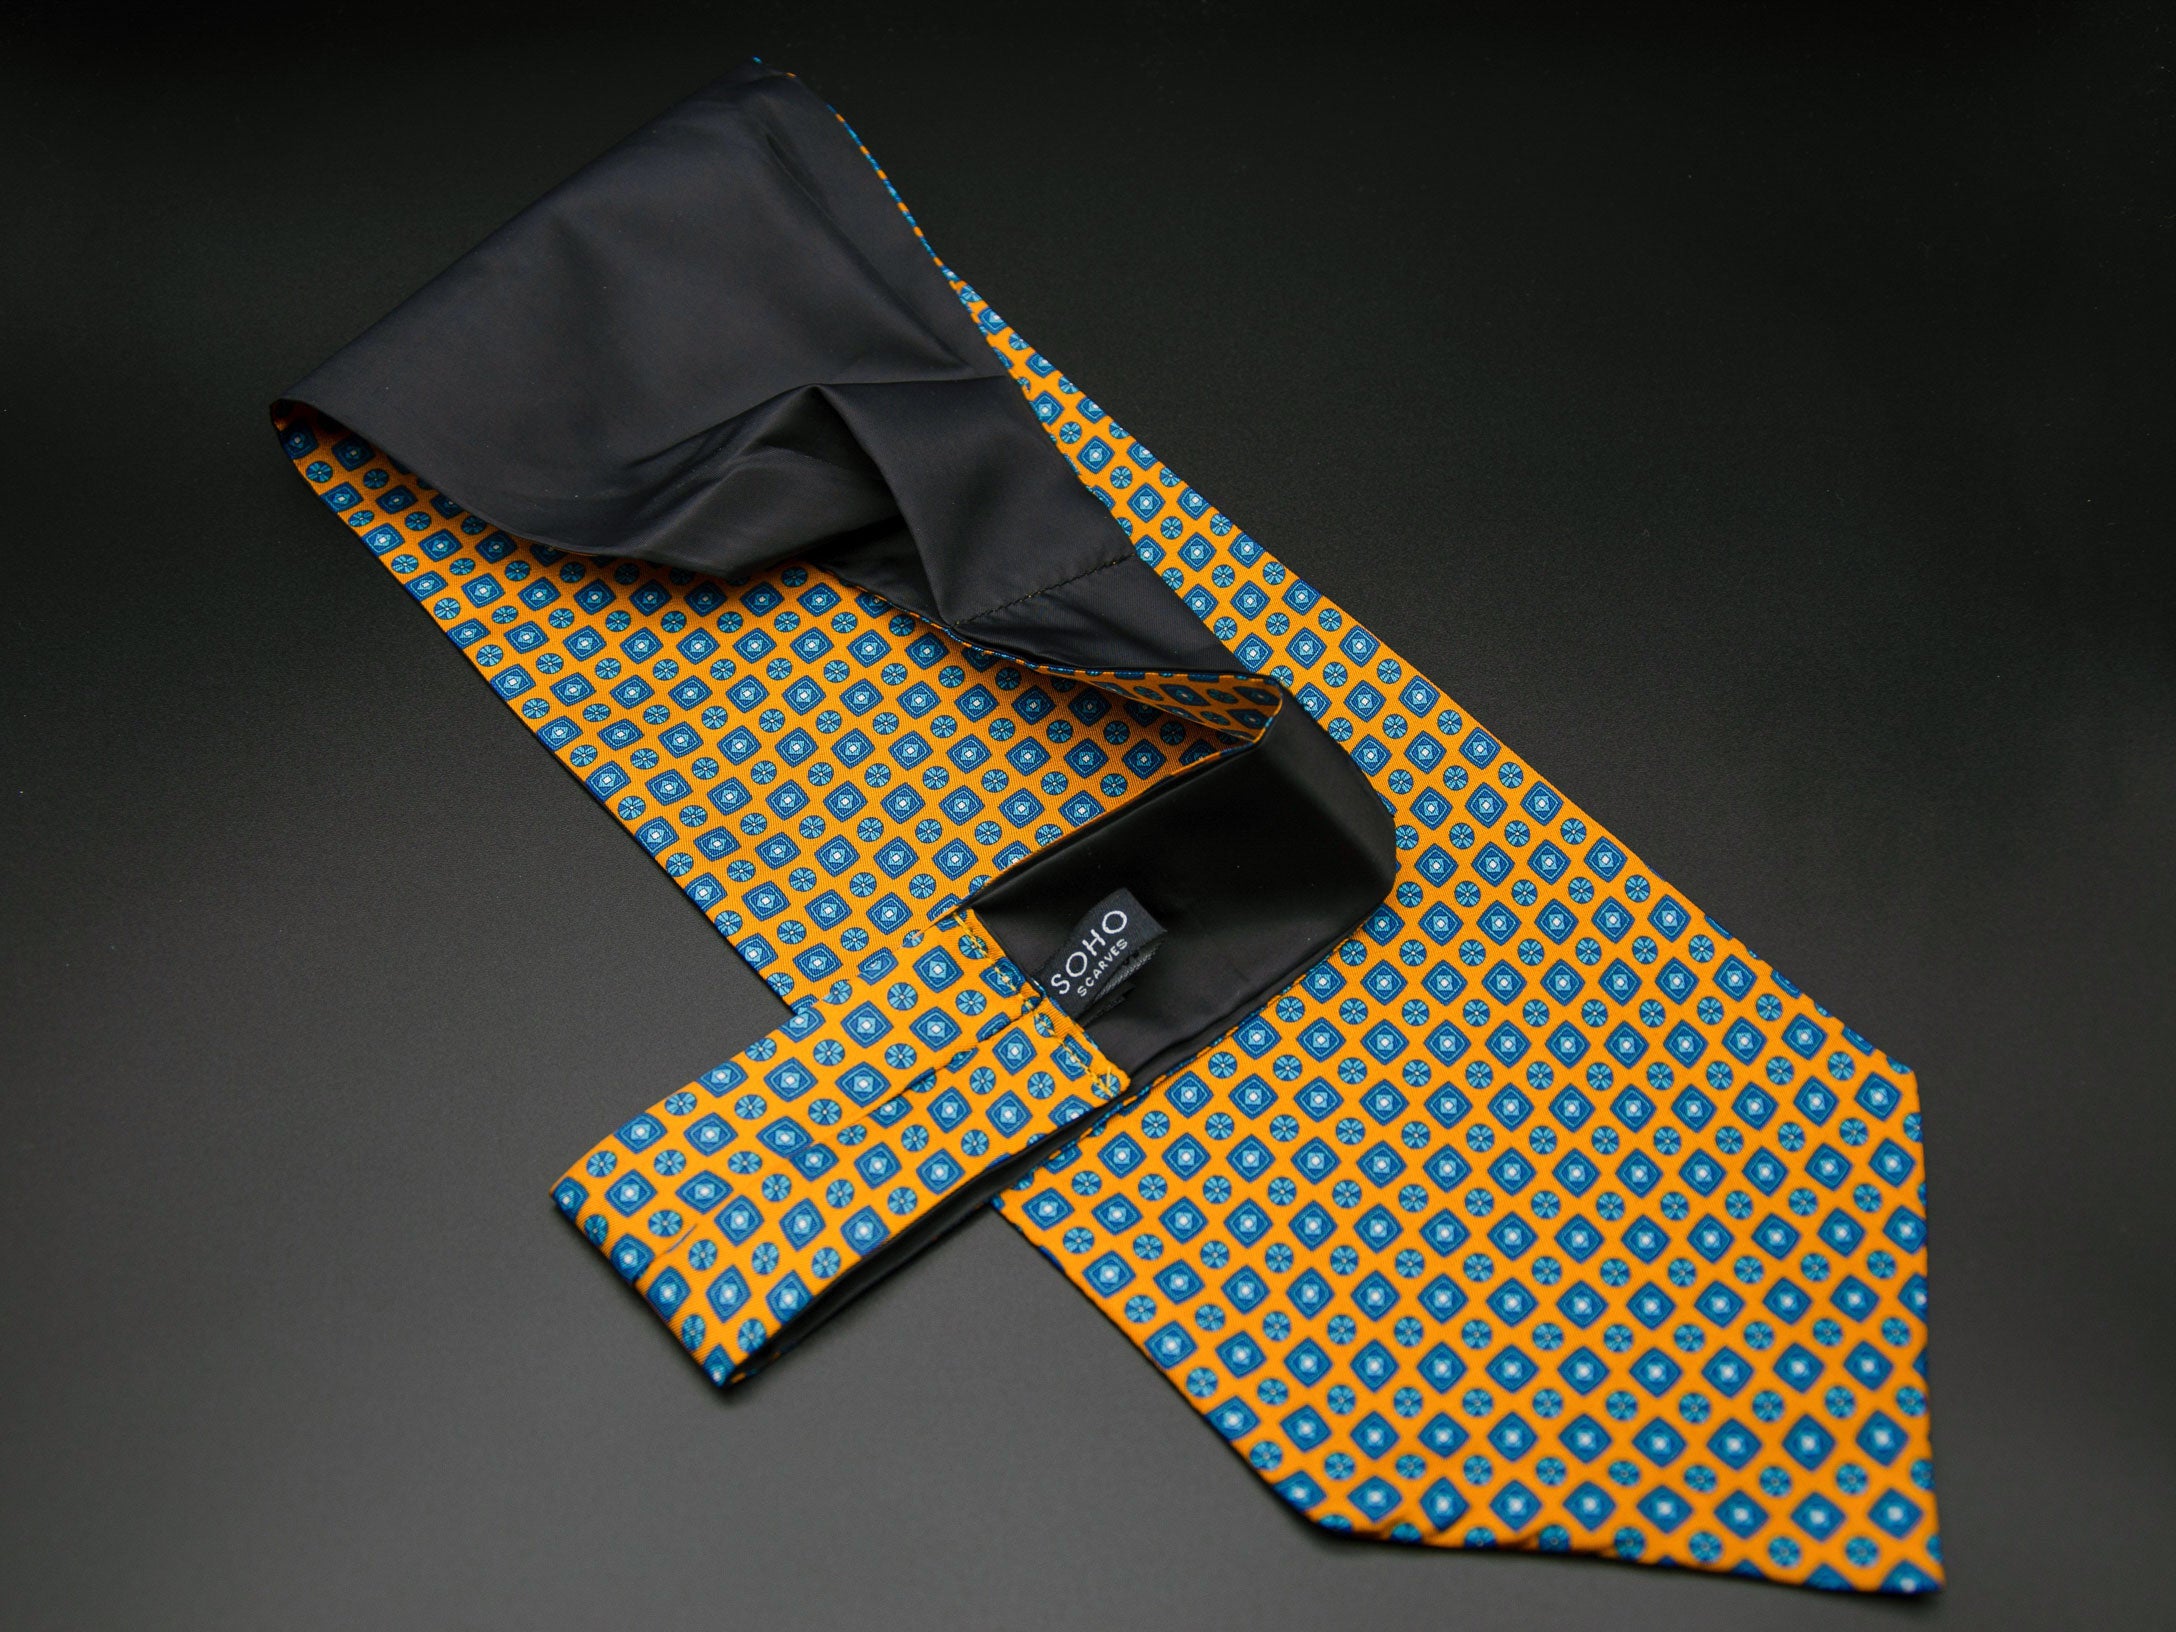 Golden 'Madrid' single pointed Ascot tie arranged diagonally with wide point in foreground with clear view of blue motifs made up of tiny squares, disks and diamonds. Narrow end of tie folded back and over to reveal dark lining and 'SOHO Scarves' branding label.